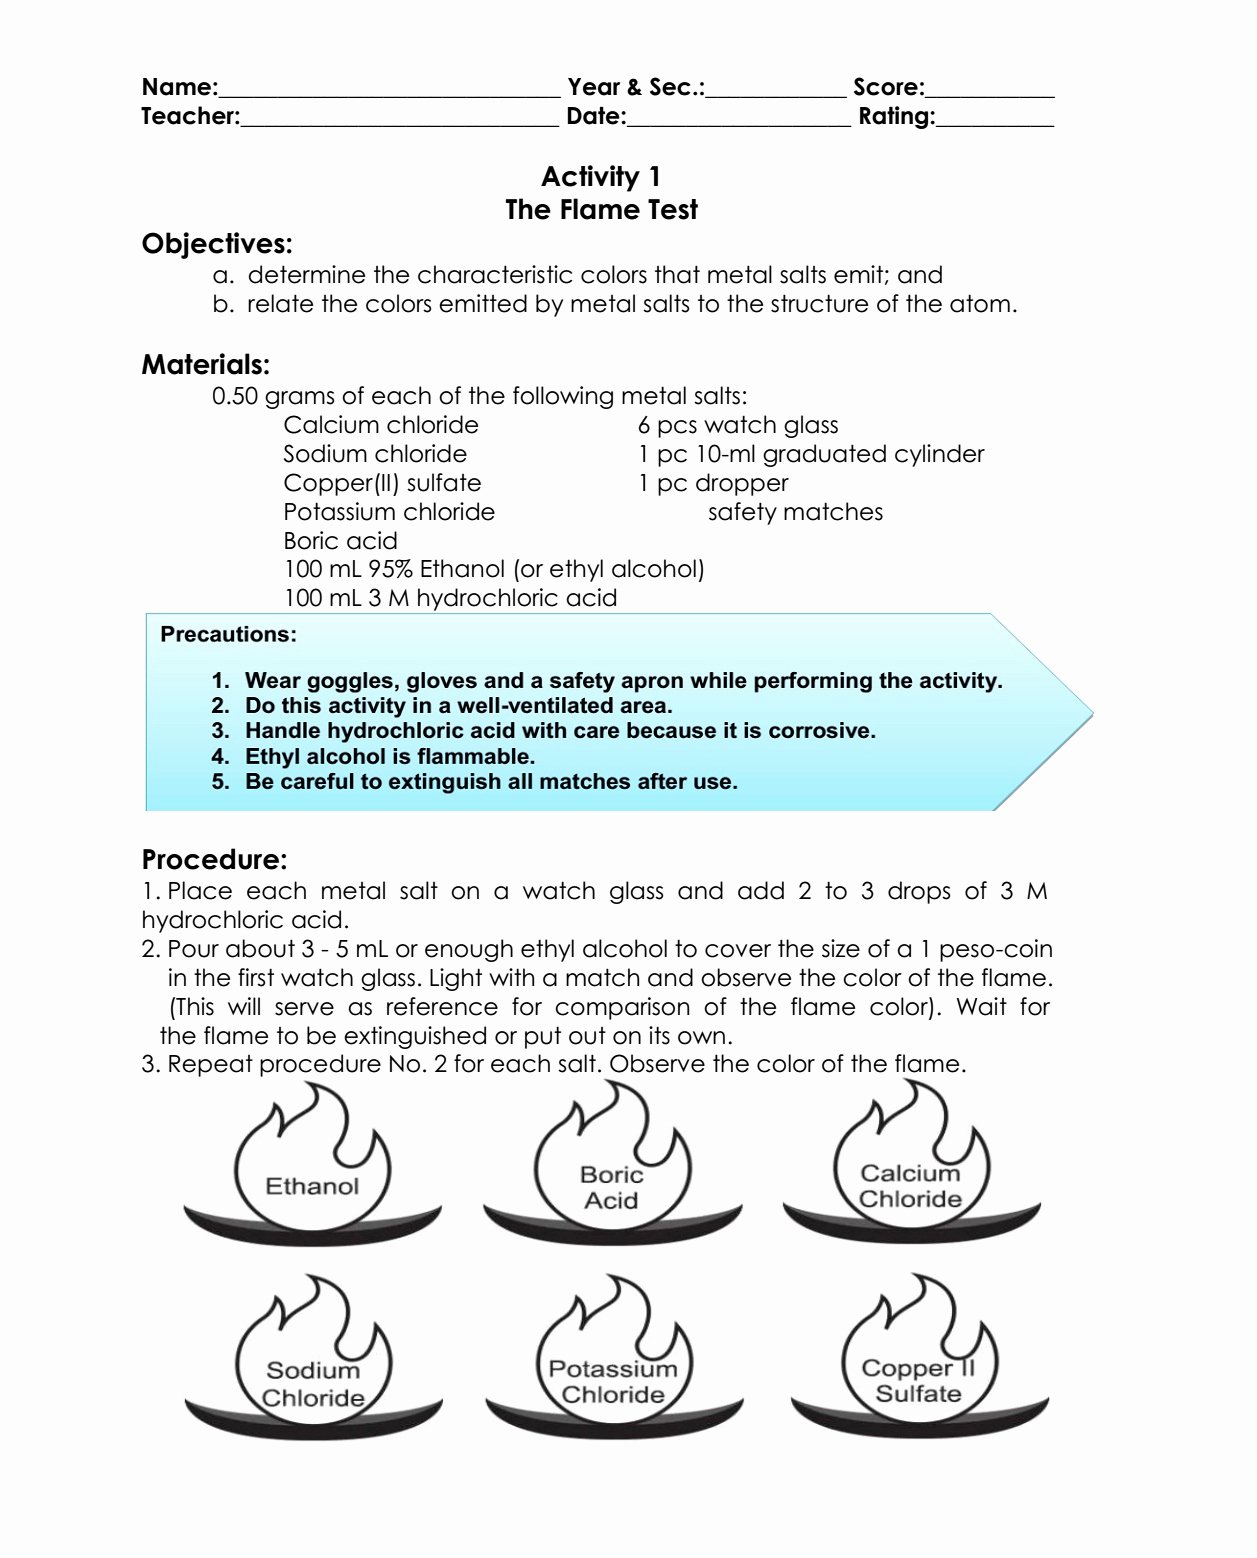 Composition Of Matter Worksheet Unique Science Concepts and Questions K to 12 Electronic